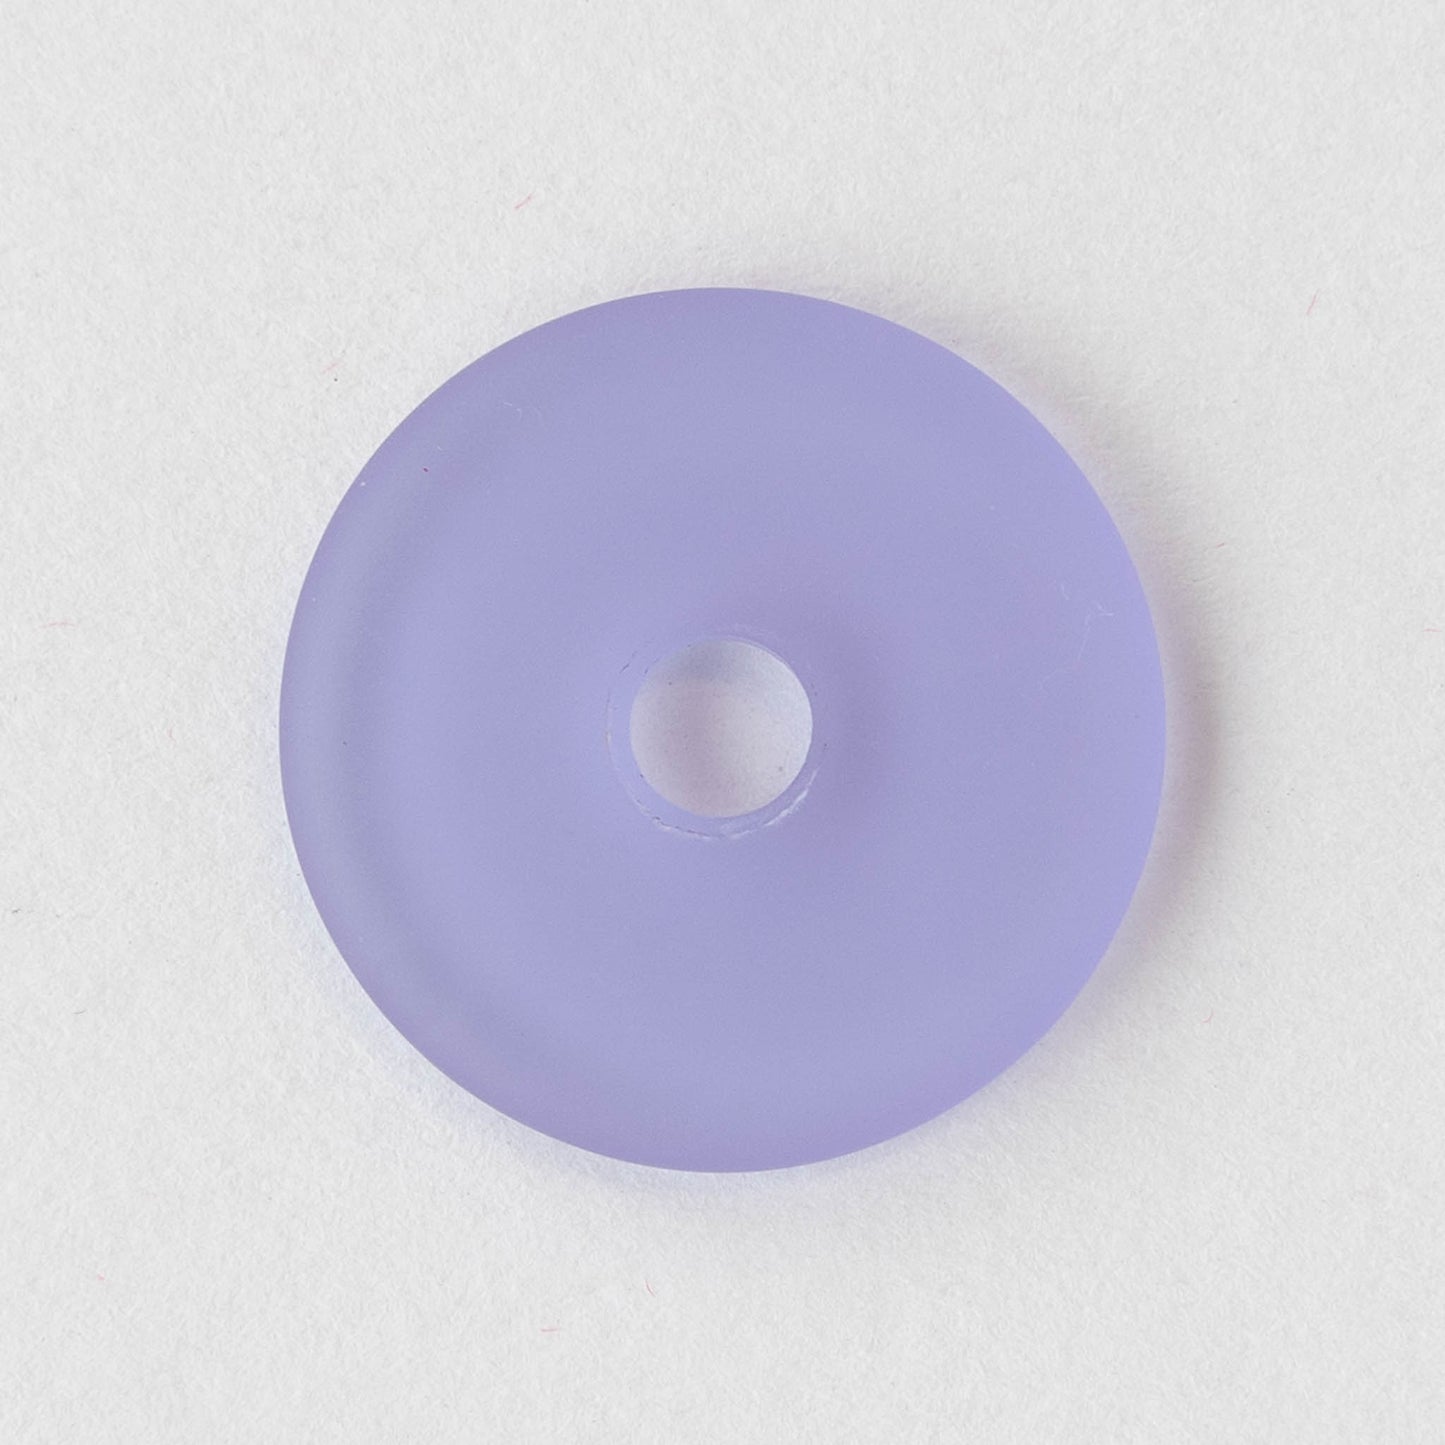 25mm Frosted Glass Donut - Lavender- 4 Beads